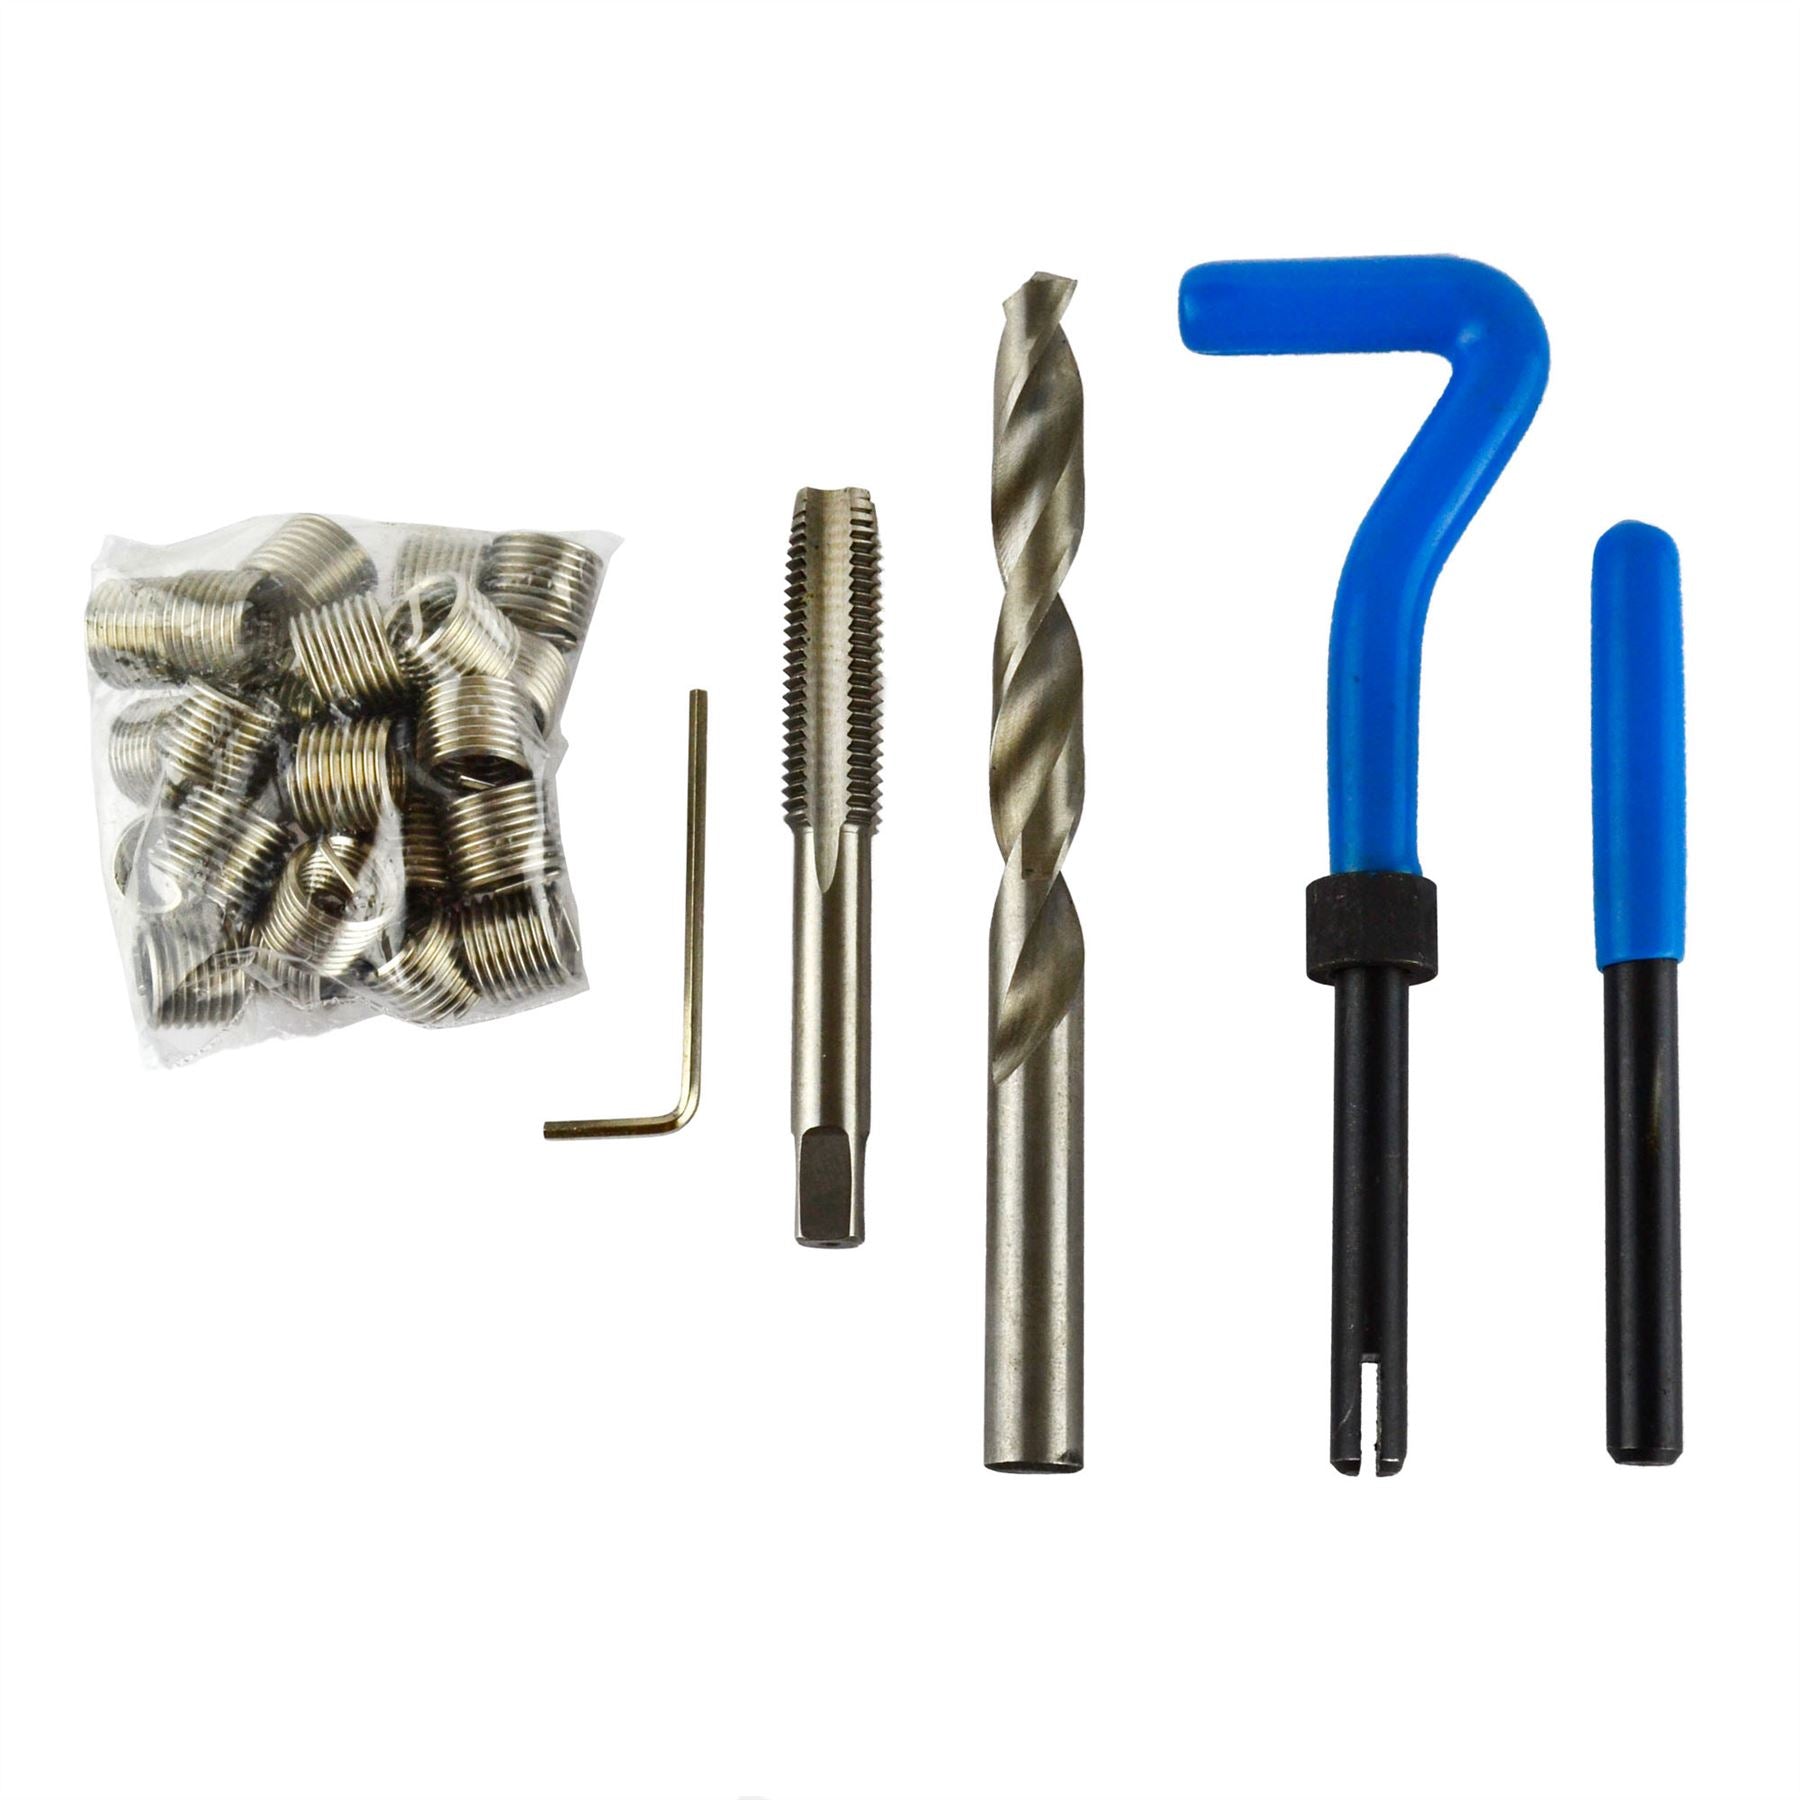 Thread installation and repair kit helicoil set 88pc metric sizes M6-M10 AT212